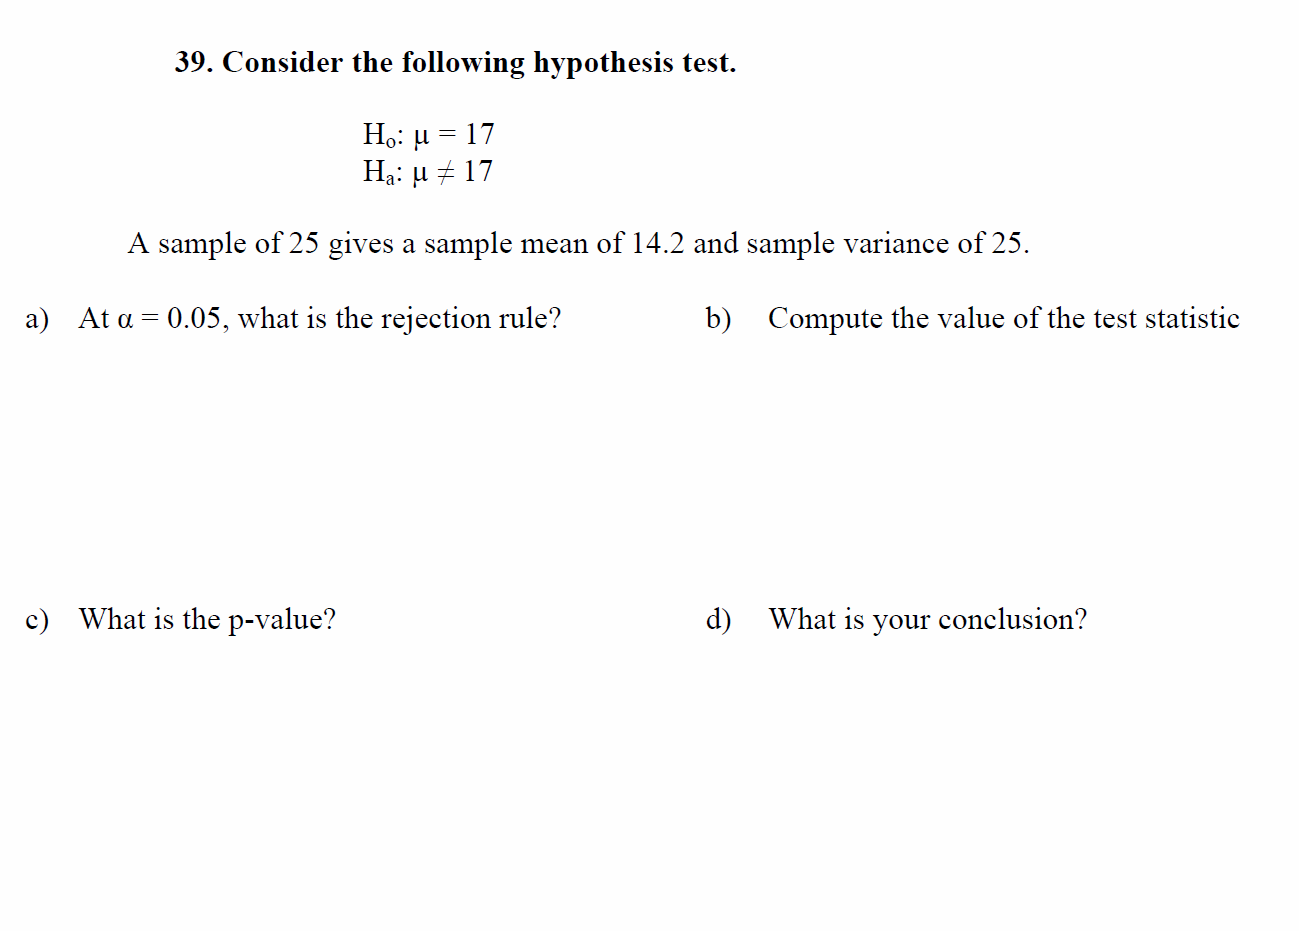 consider the hypothesis test h0